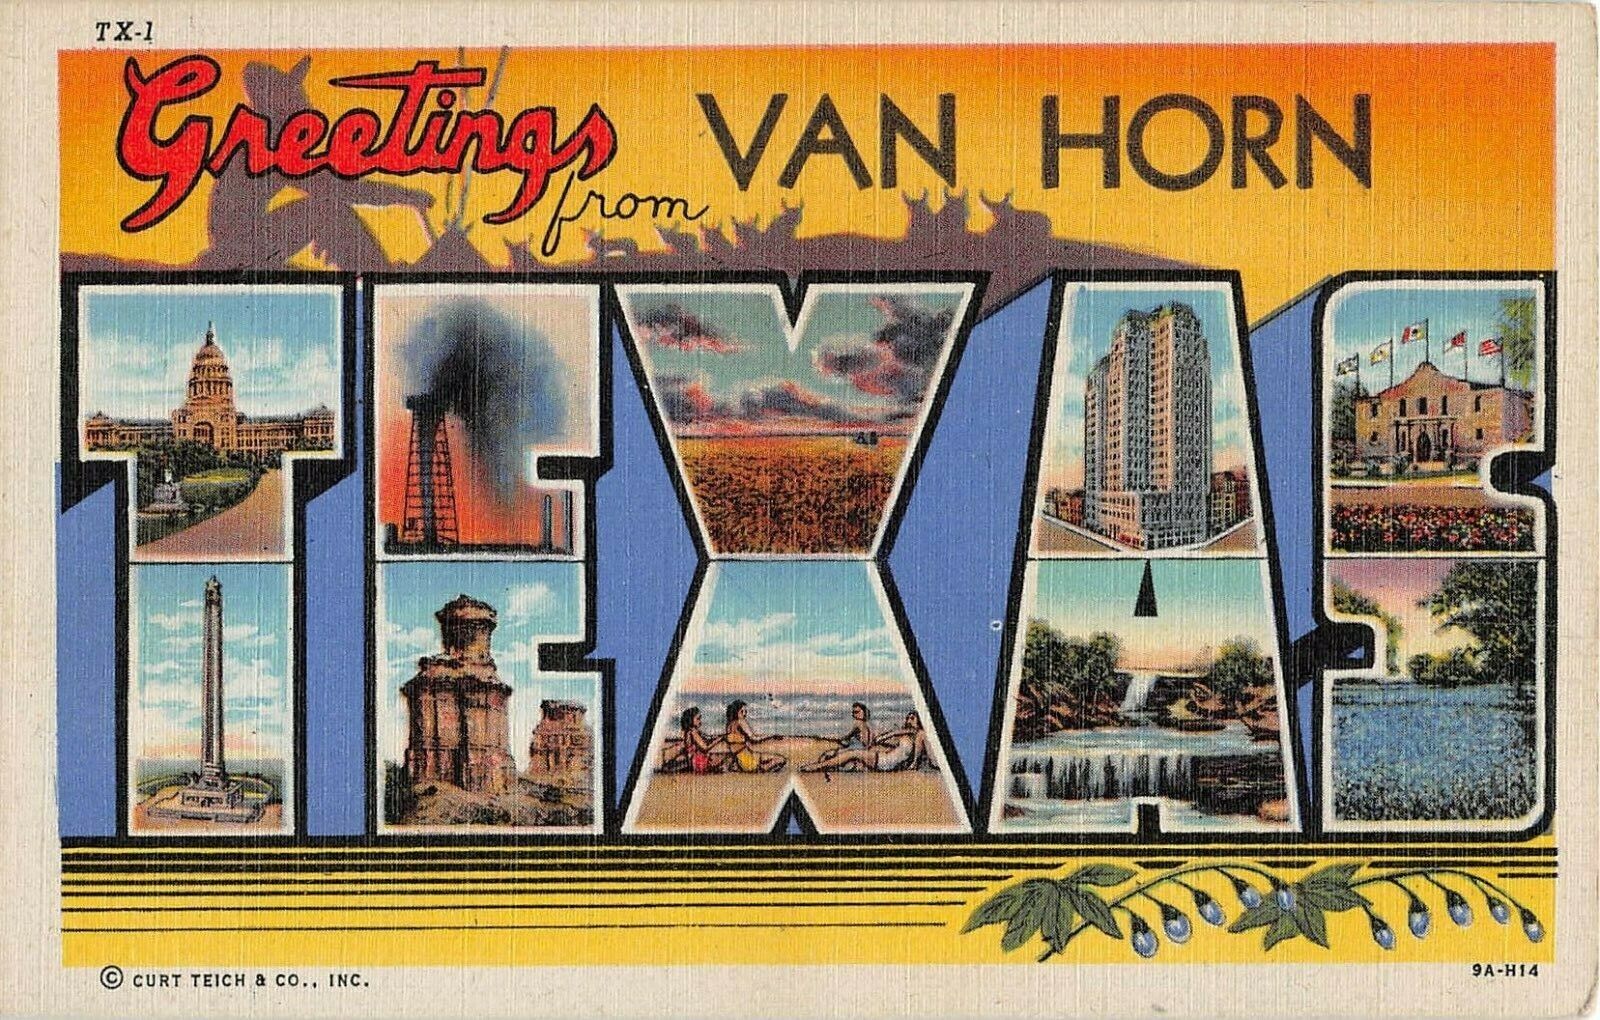 Van Horn Texas TX Greetings From Large Letter Linen 9A-H14 Postcard TX-1